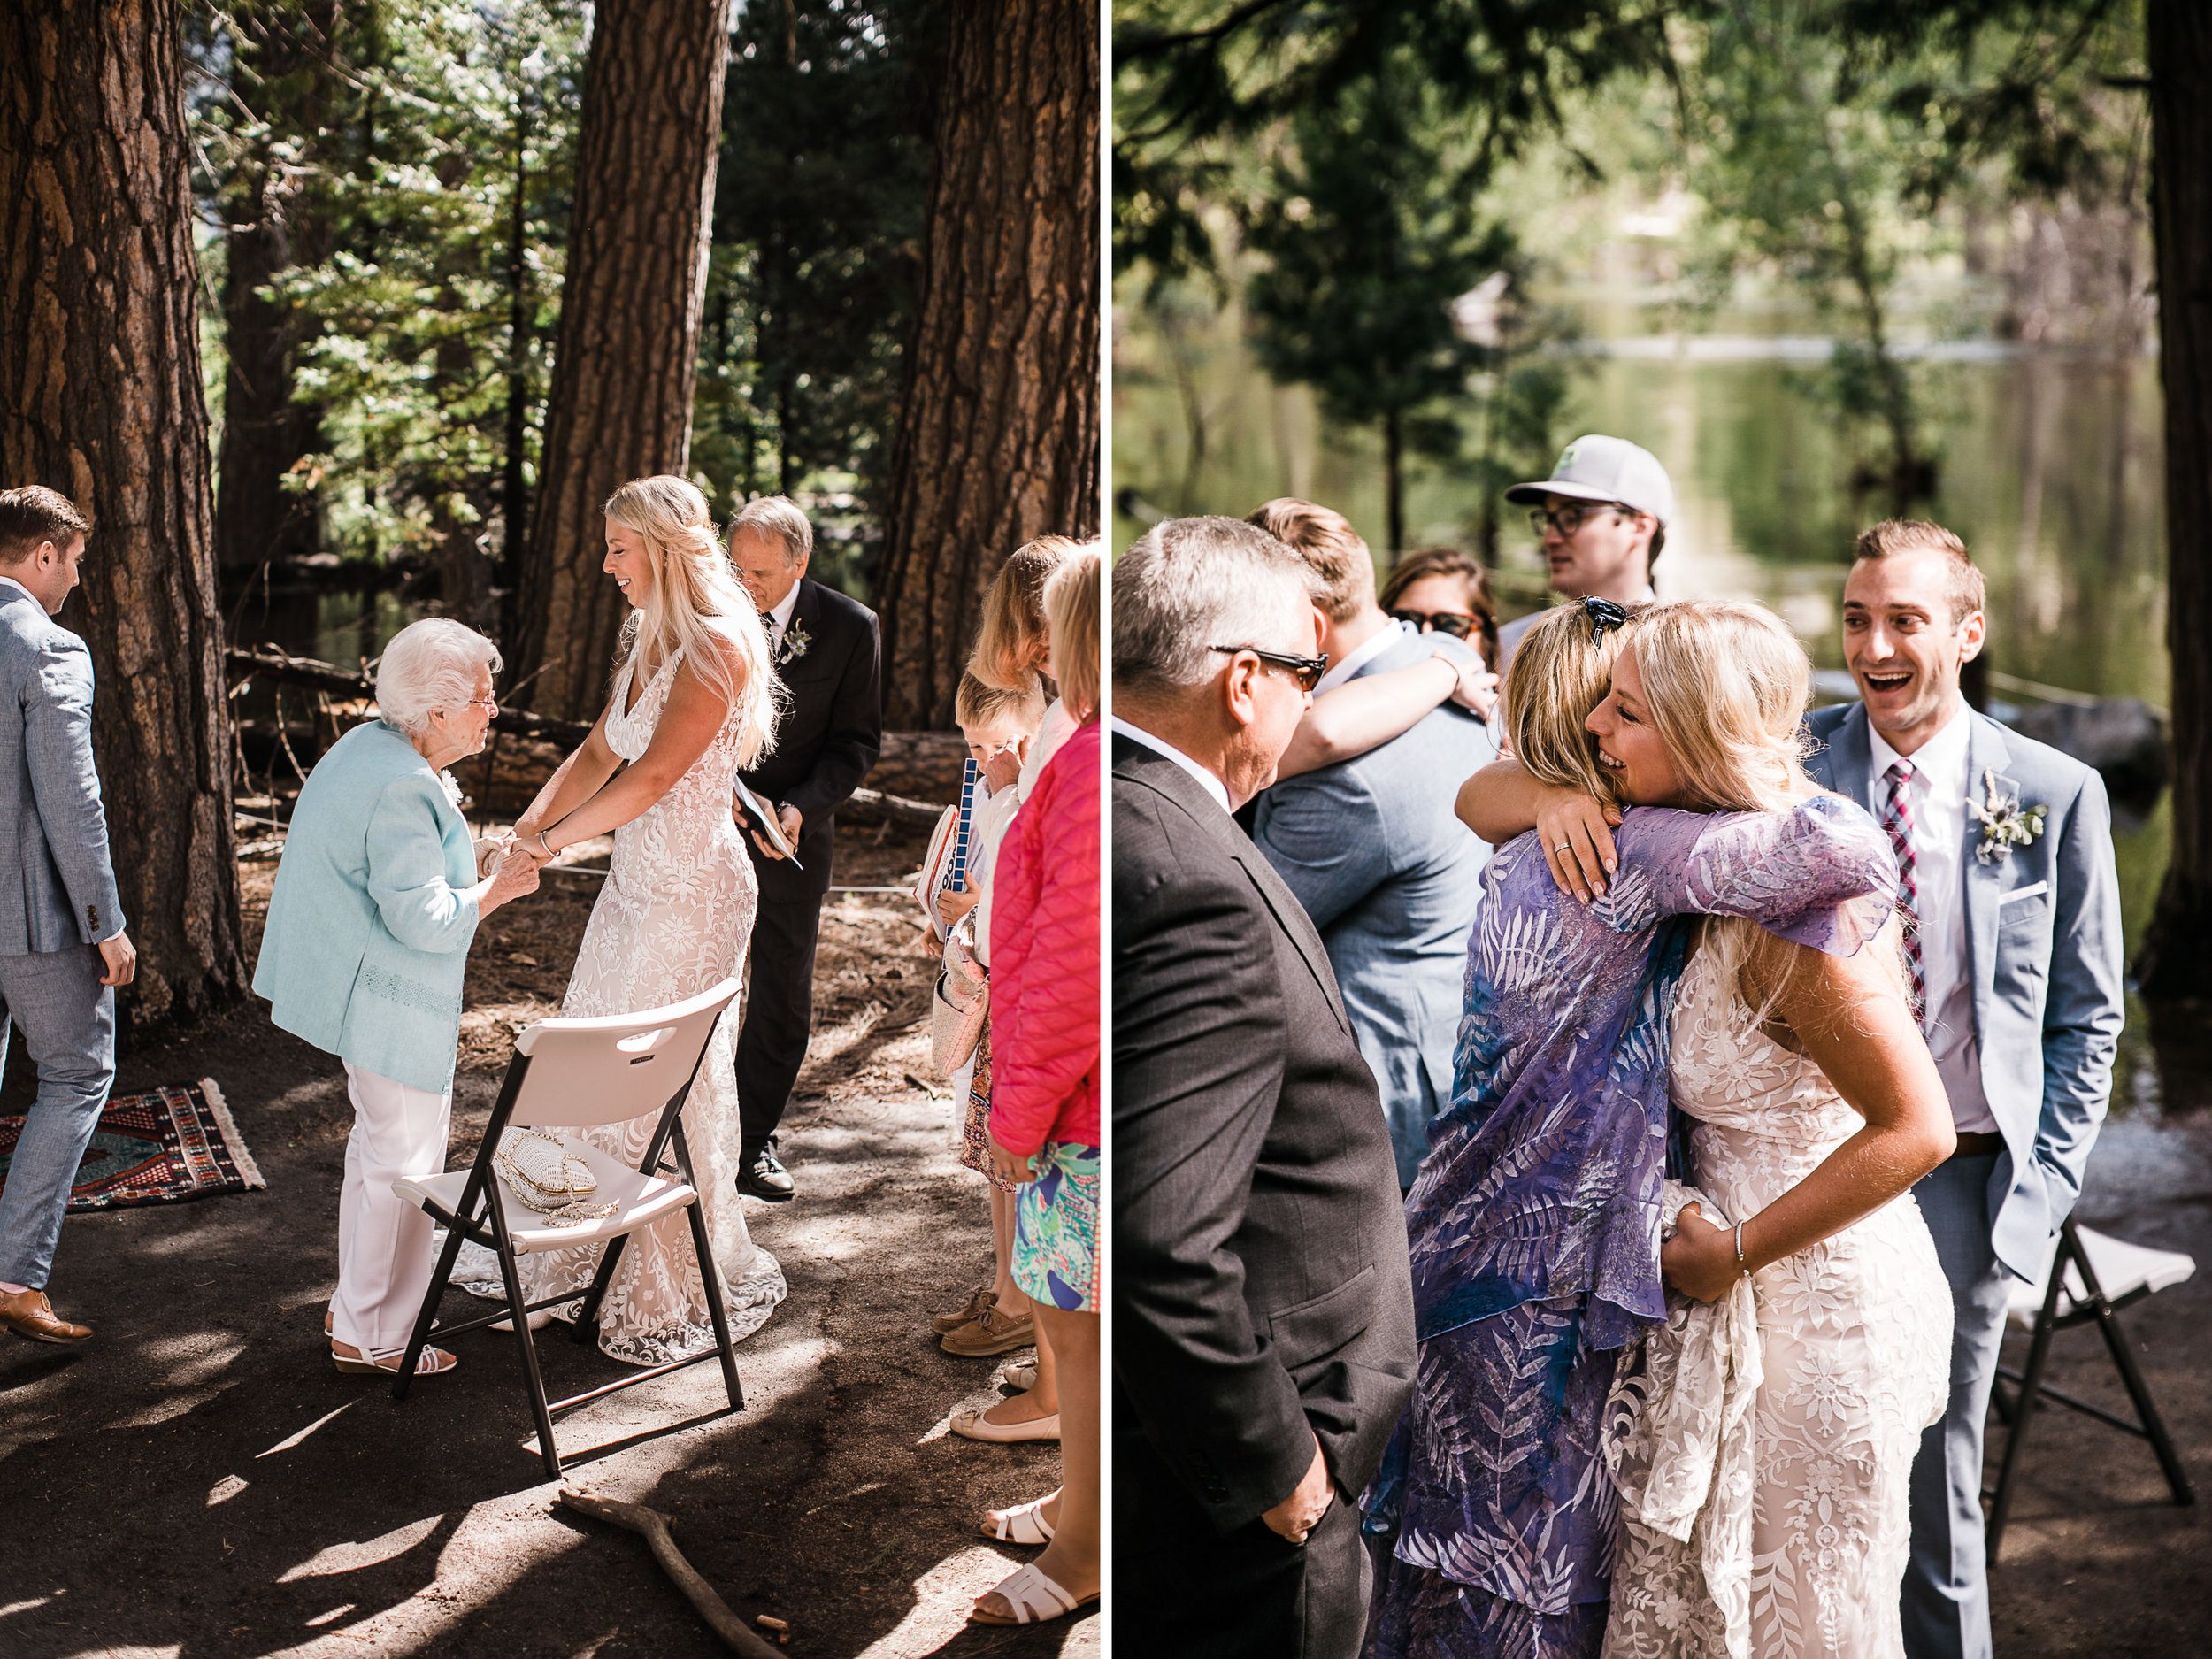 Erika + Grant’s intimate Yosemite National Park destination wedding + romantic backyard reception under twinkle lights | ceremony in the woods in yosemite valley | the hearnes adventure photography